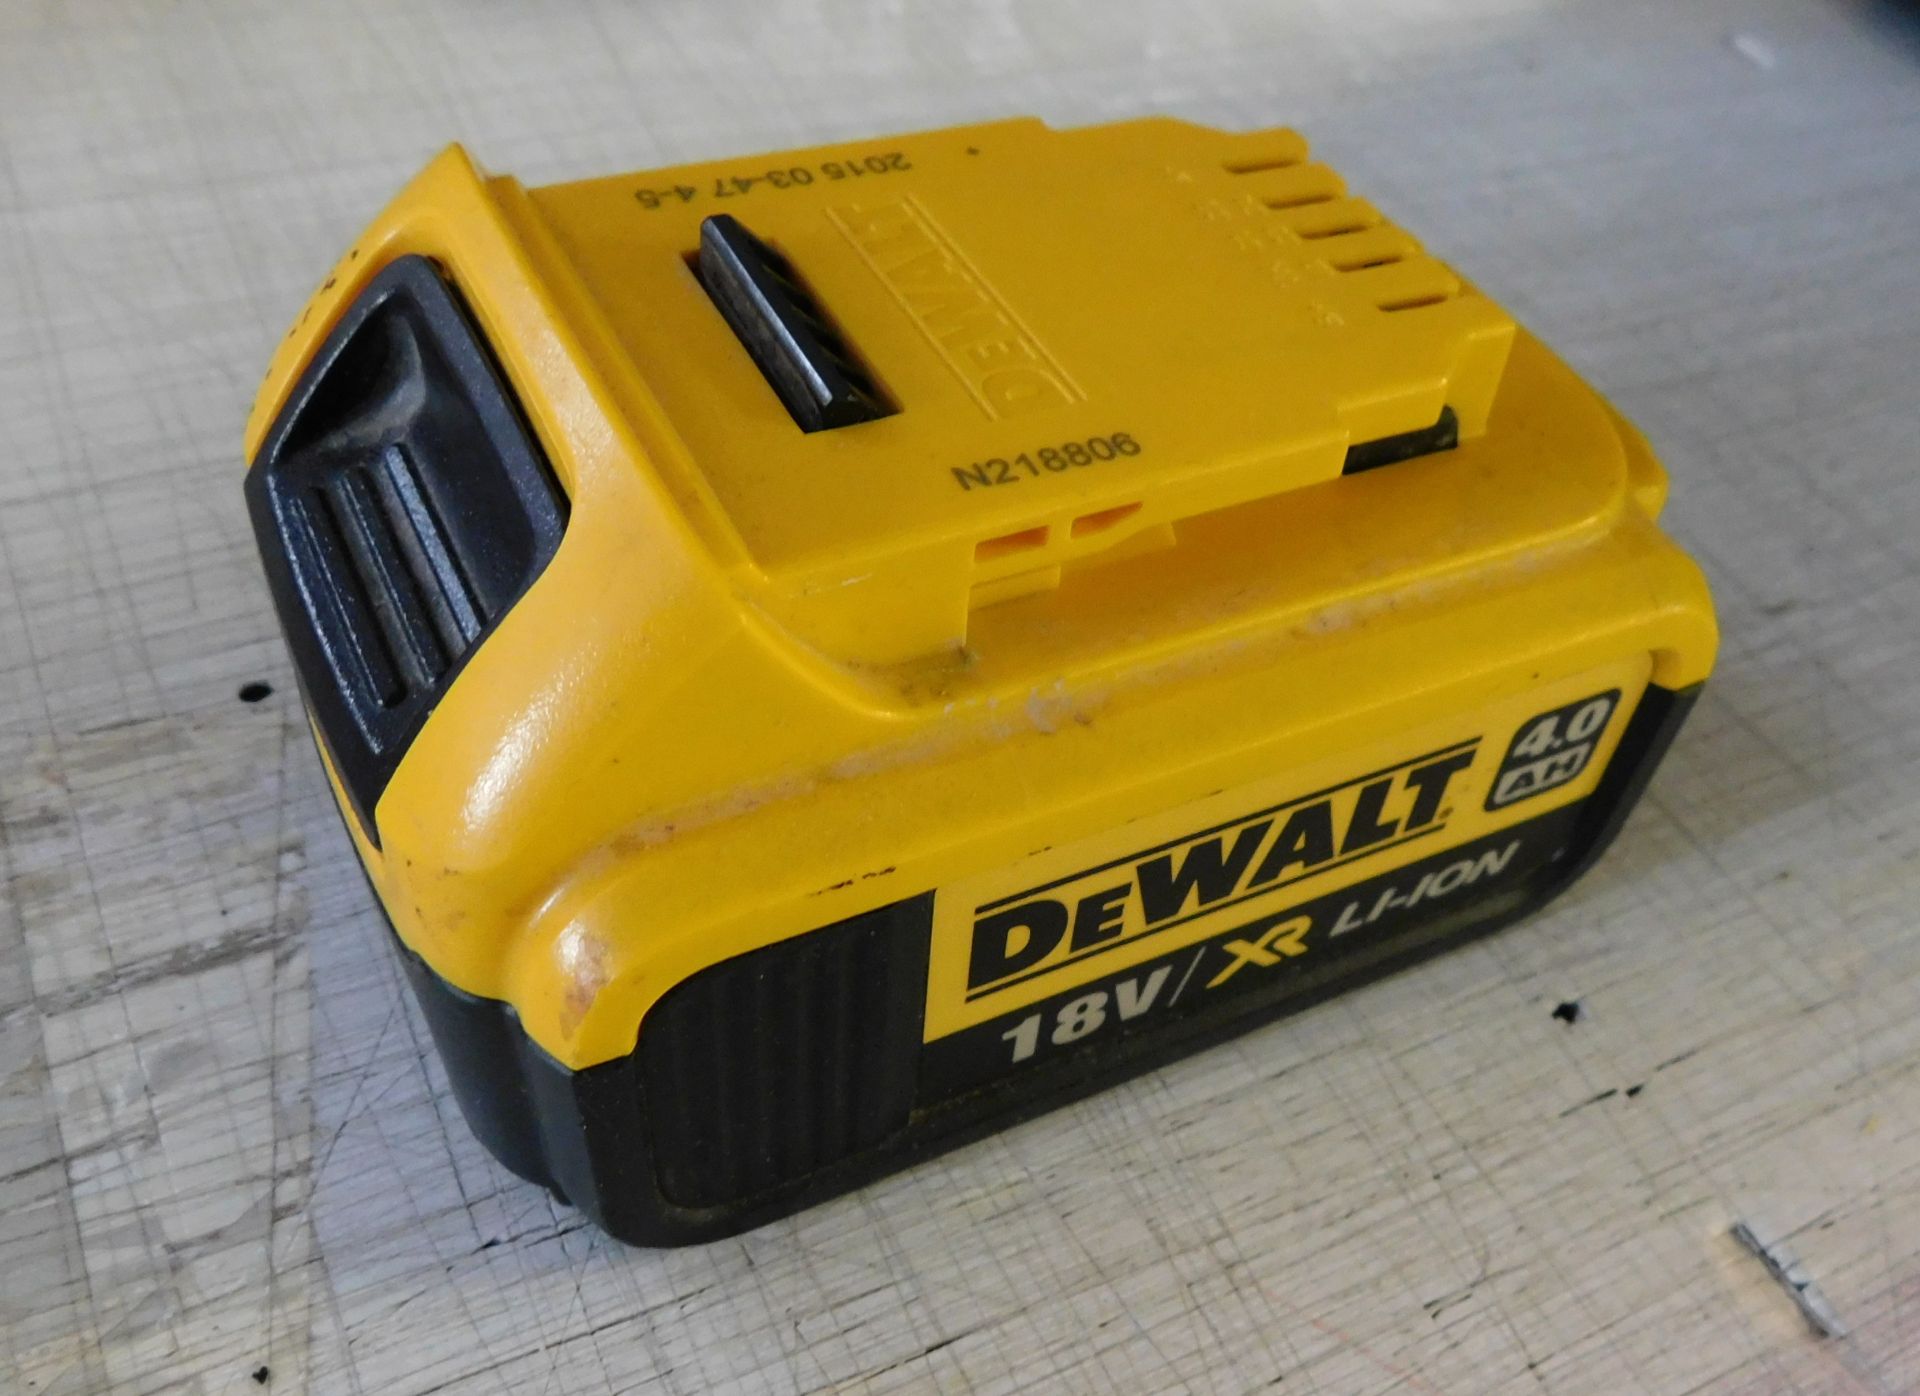 DeWalt 18v Cordless Drill, 2 Batteries, Charger & Carry Case (on mezzanine) (Location Rochdale. - Image 5 of 8